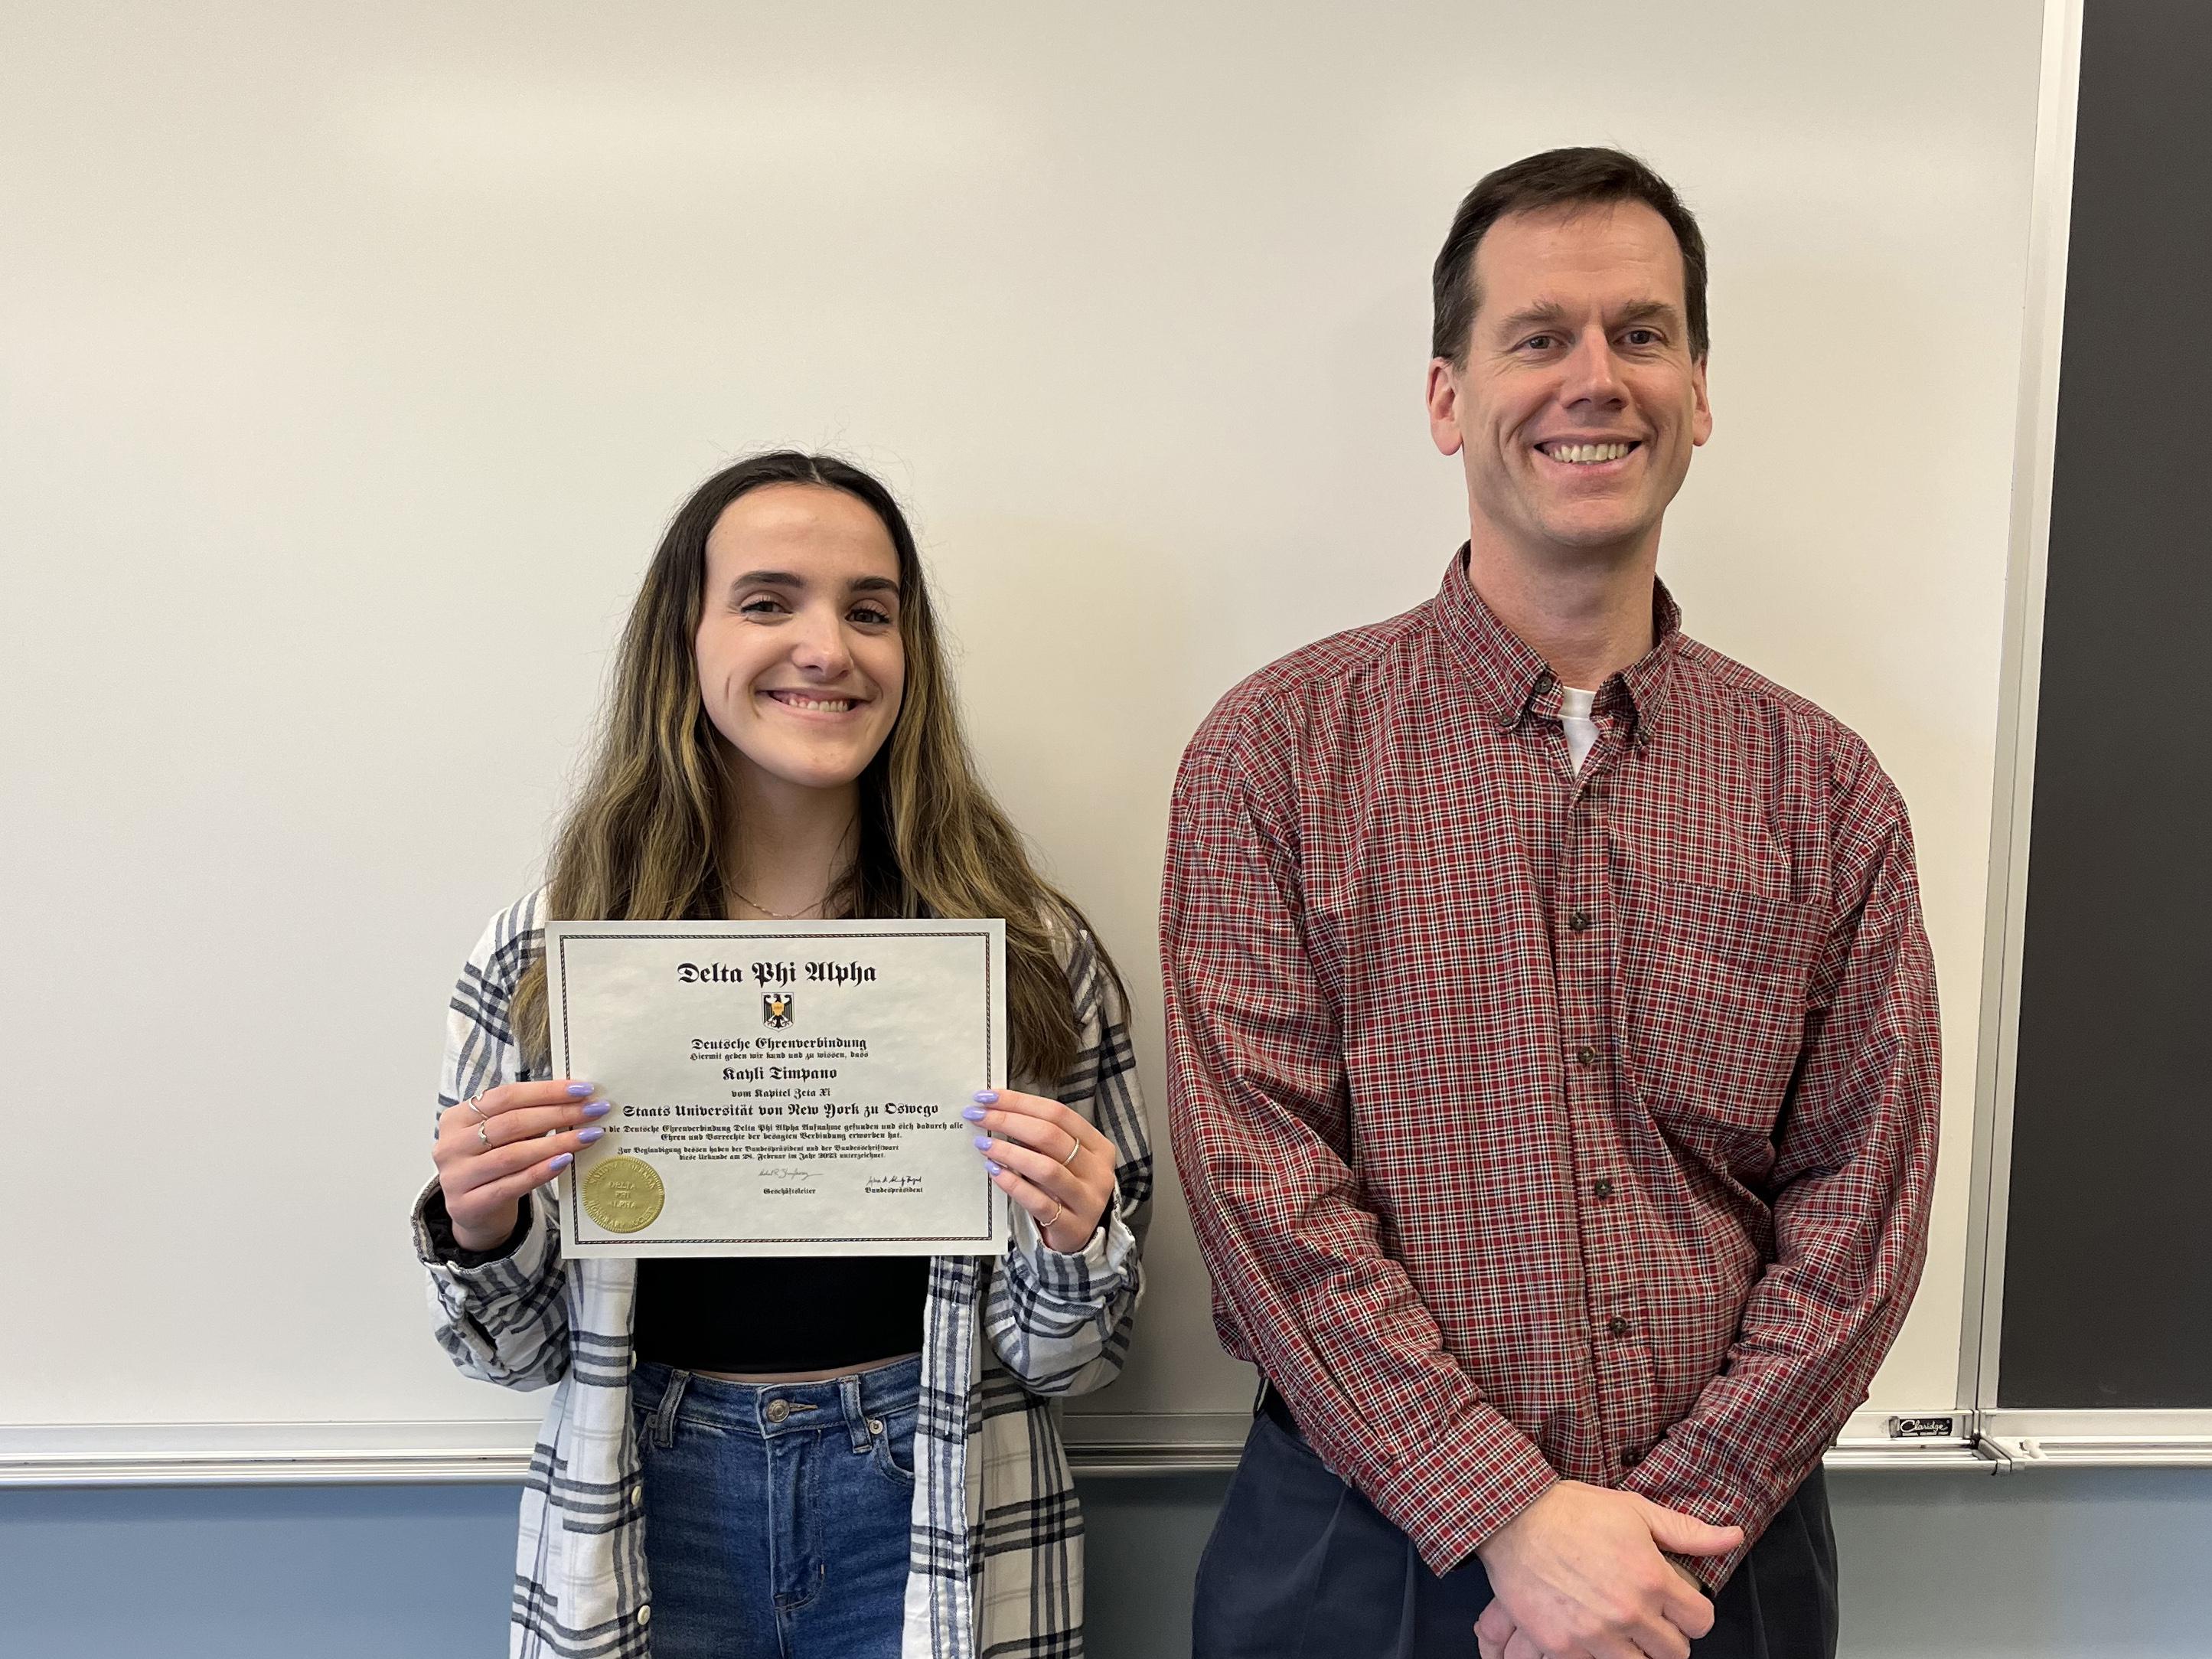 Student Kayli Timpano, here congratulated by modern languages and literatures faculty member Patrick Schultz, earned induction into the SUNY Oswego chapter of Delta Phi Alpha, the National German Honor Society